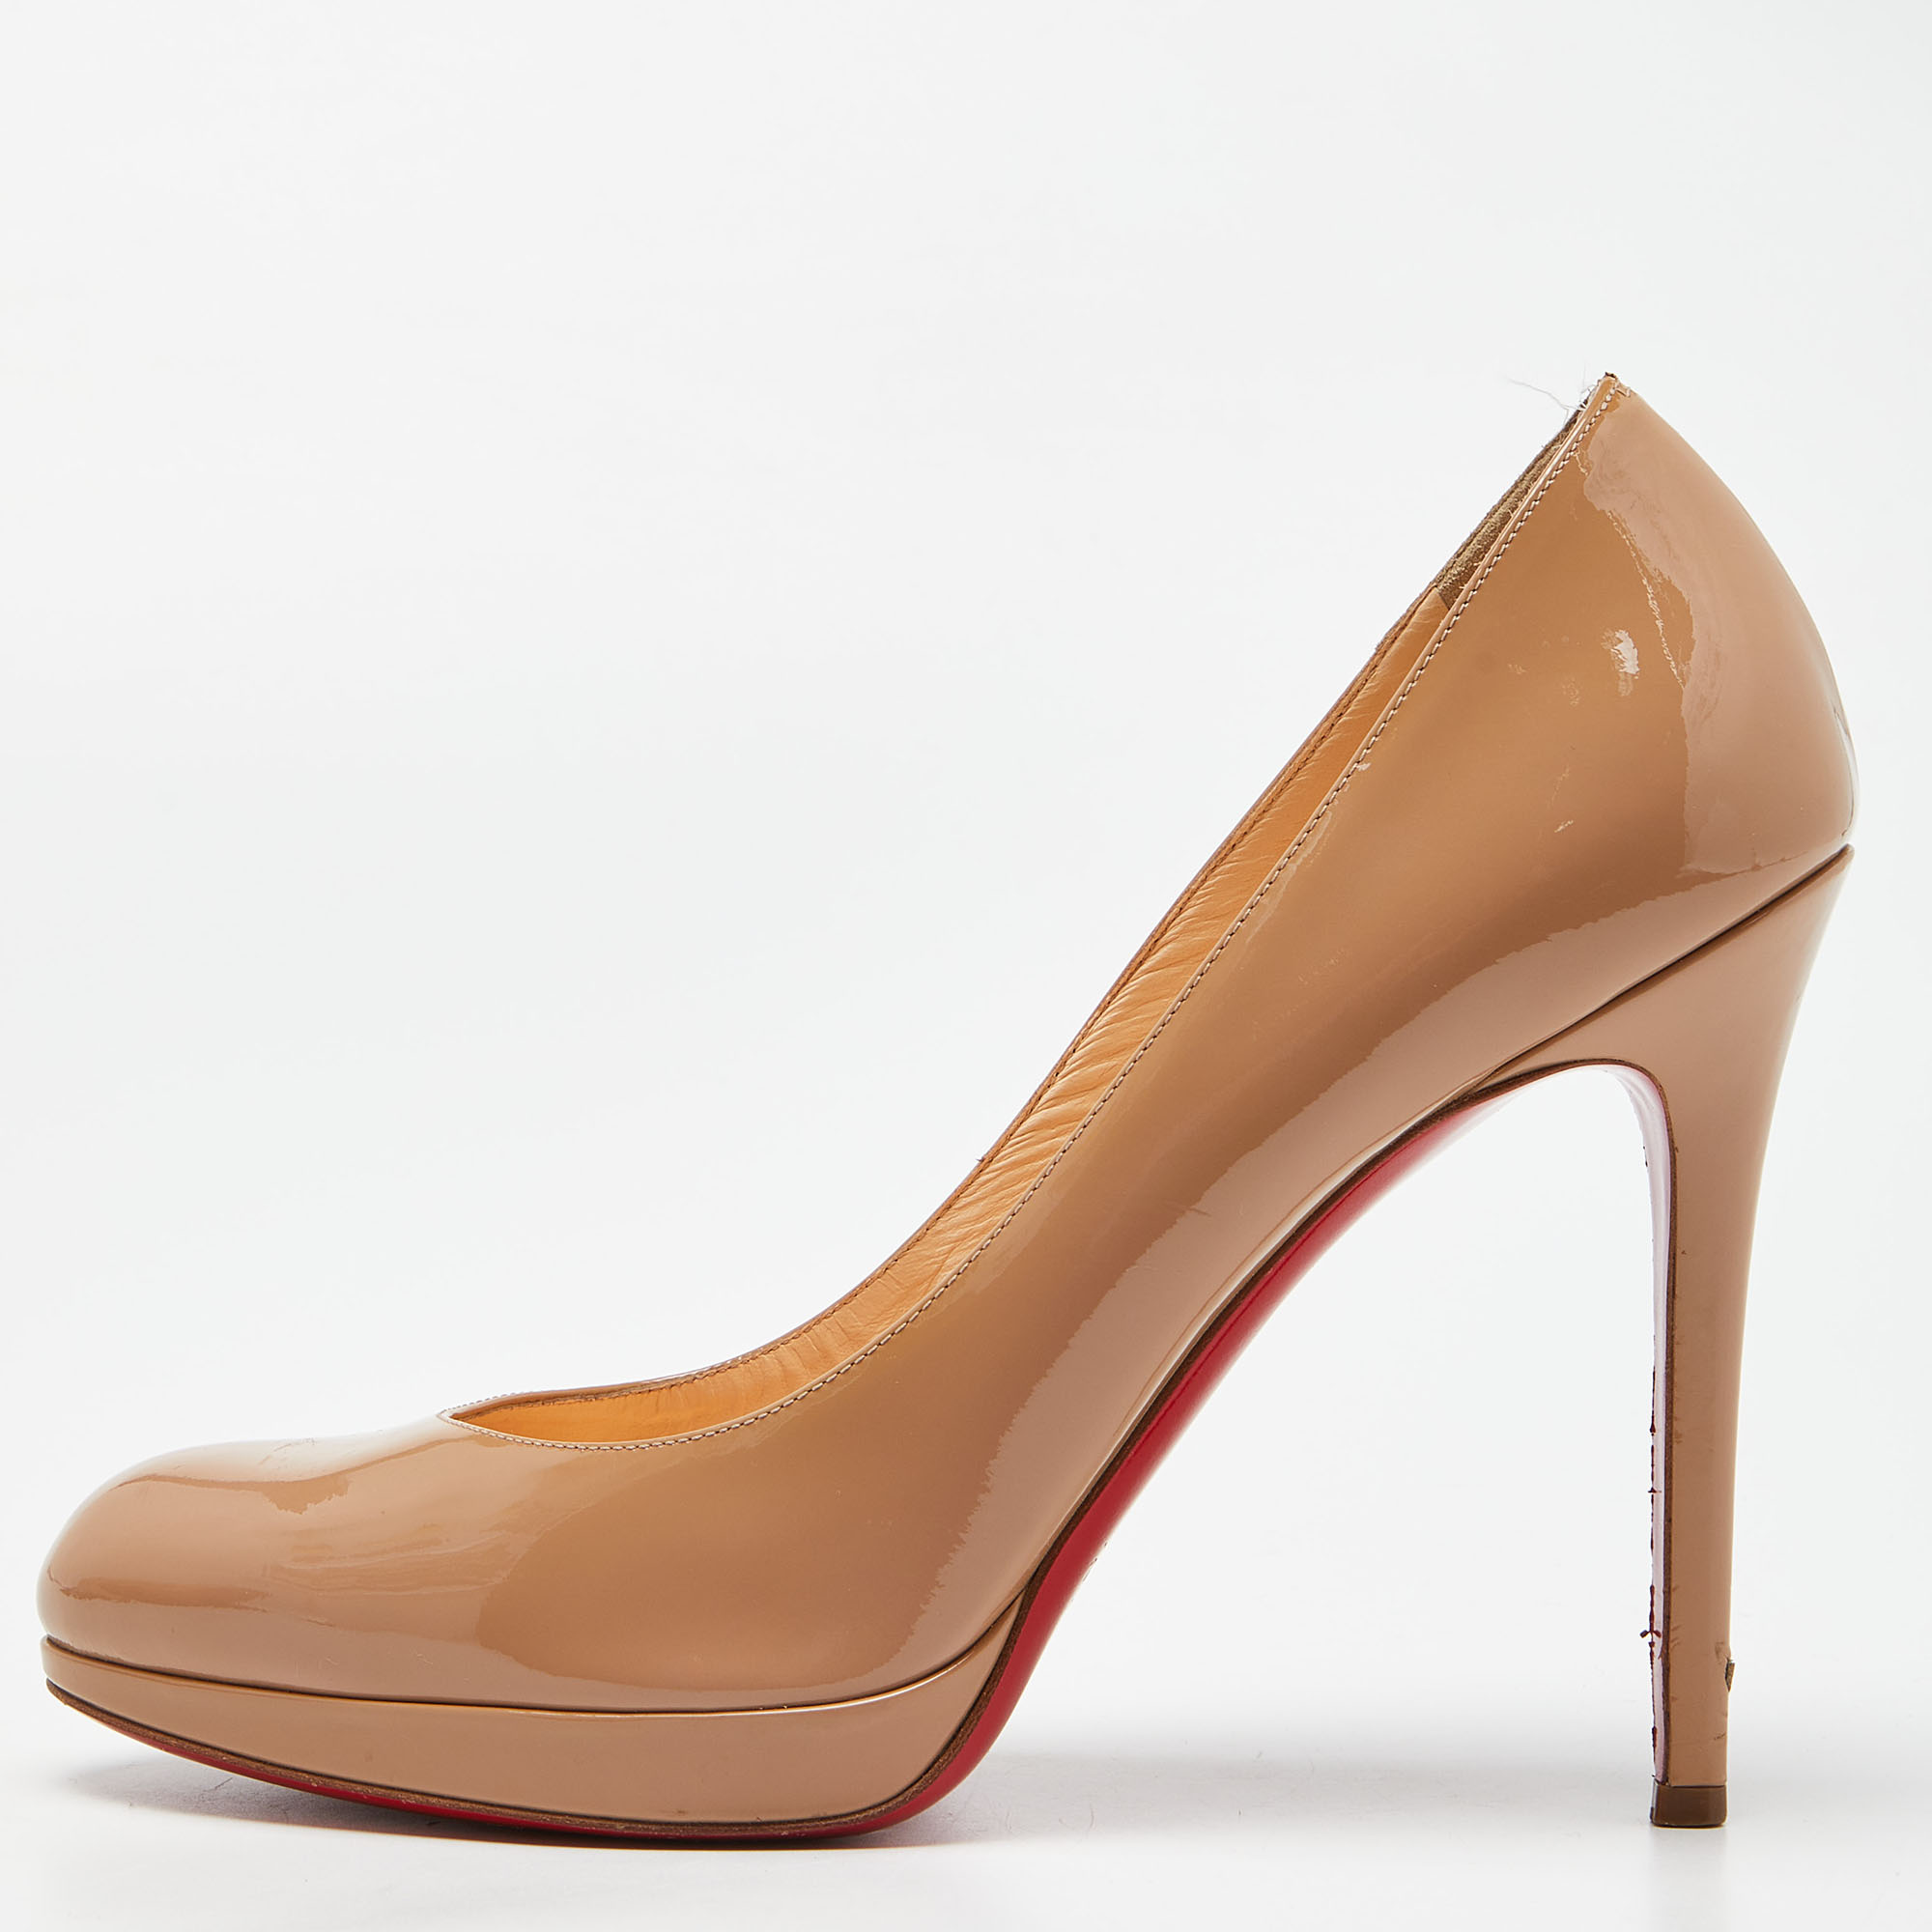 Pre-owned Christian Louboutin Beige Patent Leather New Simple Round Toe Pumps Size 39